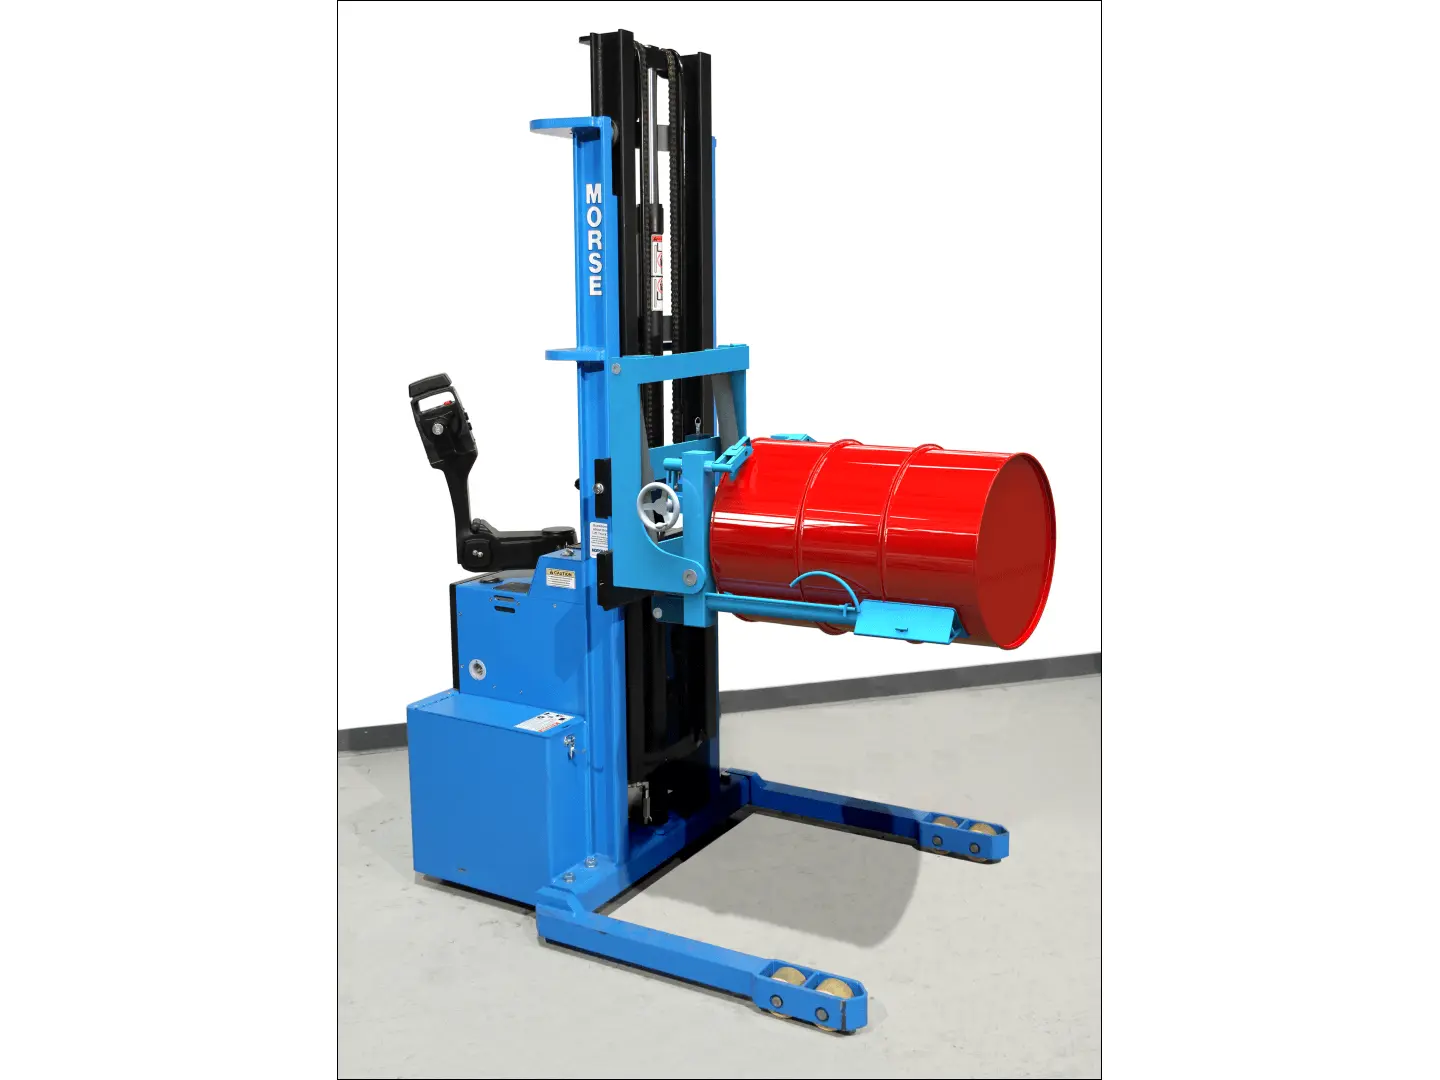 PILOT Self-Propelled walkie / stacker to rack an 800 Lb. (363 kg) drum up to 10.5 feet (3.2 m) high - Model 910